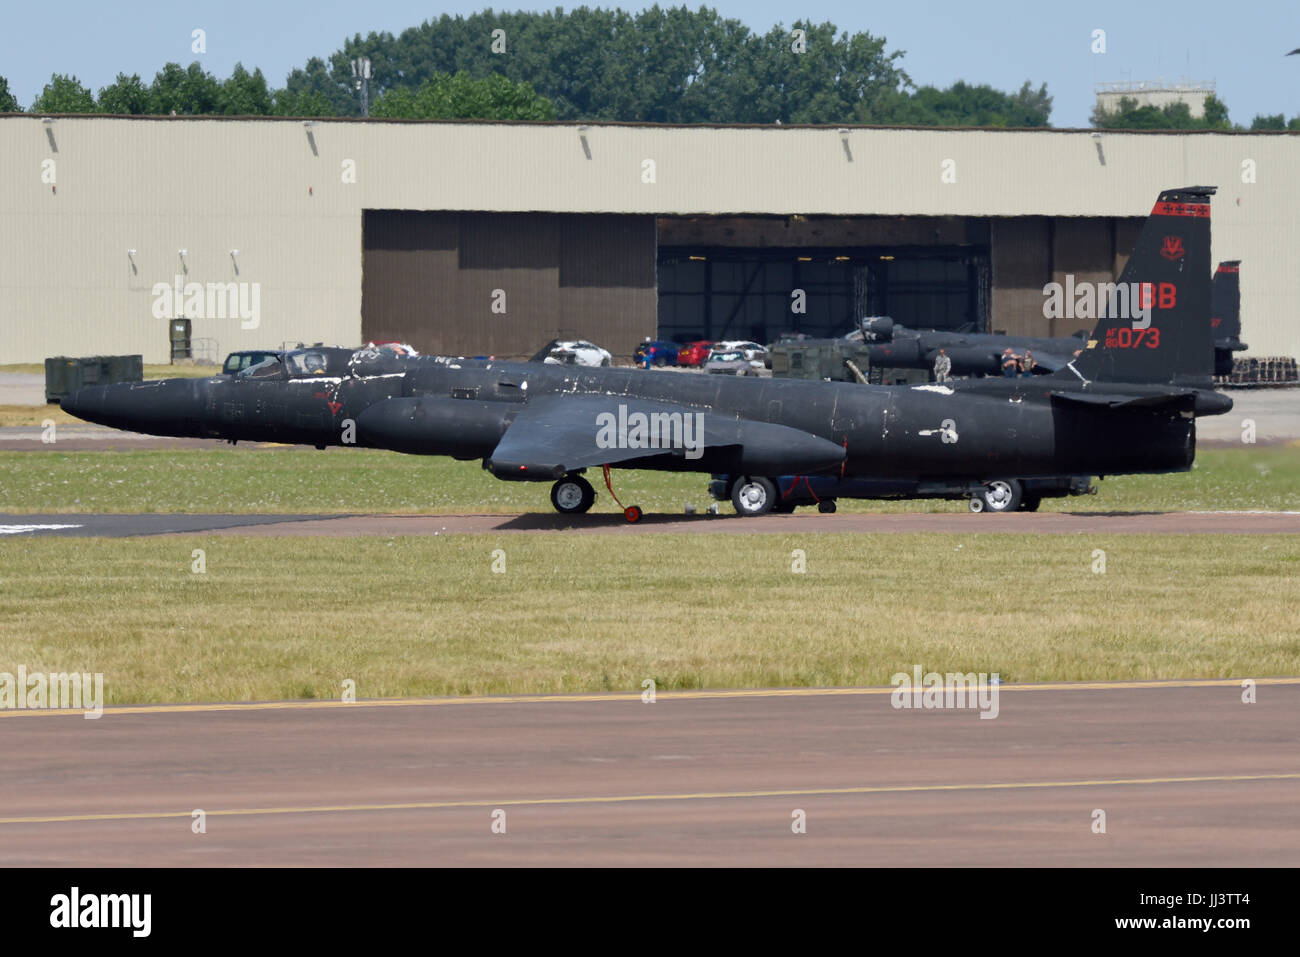 Lockheed U-2 Dragon Lady spyplane about to take off, with another U2 in the background Stock Photo